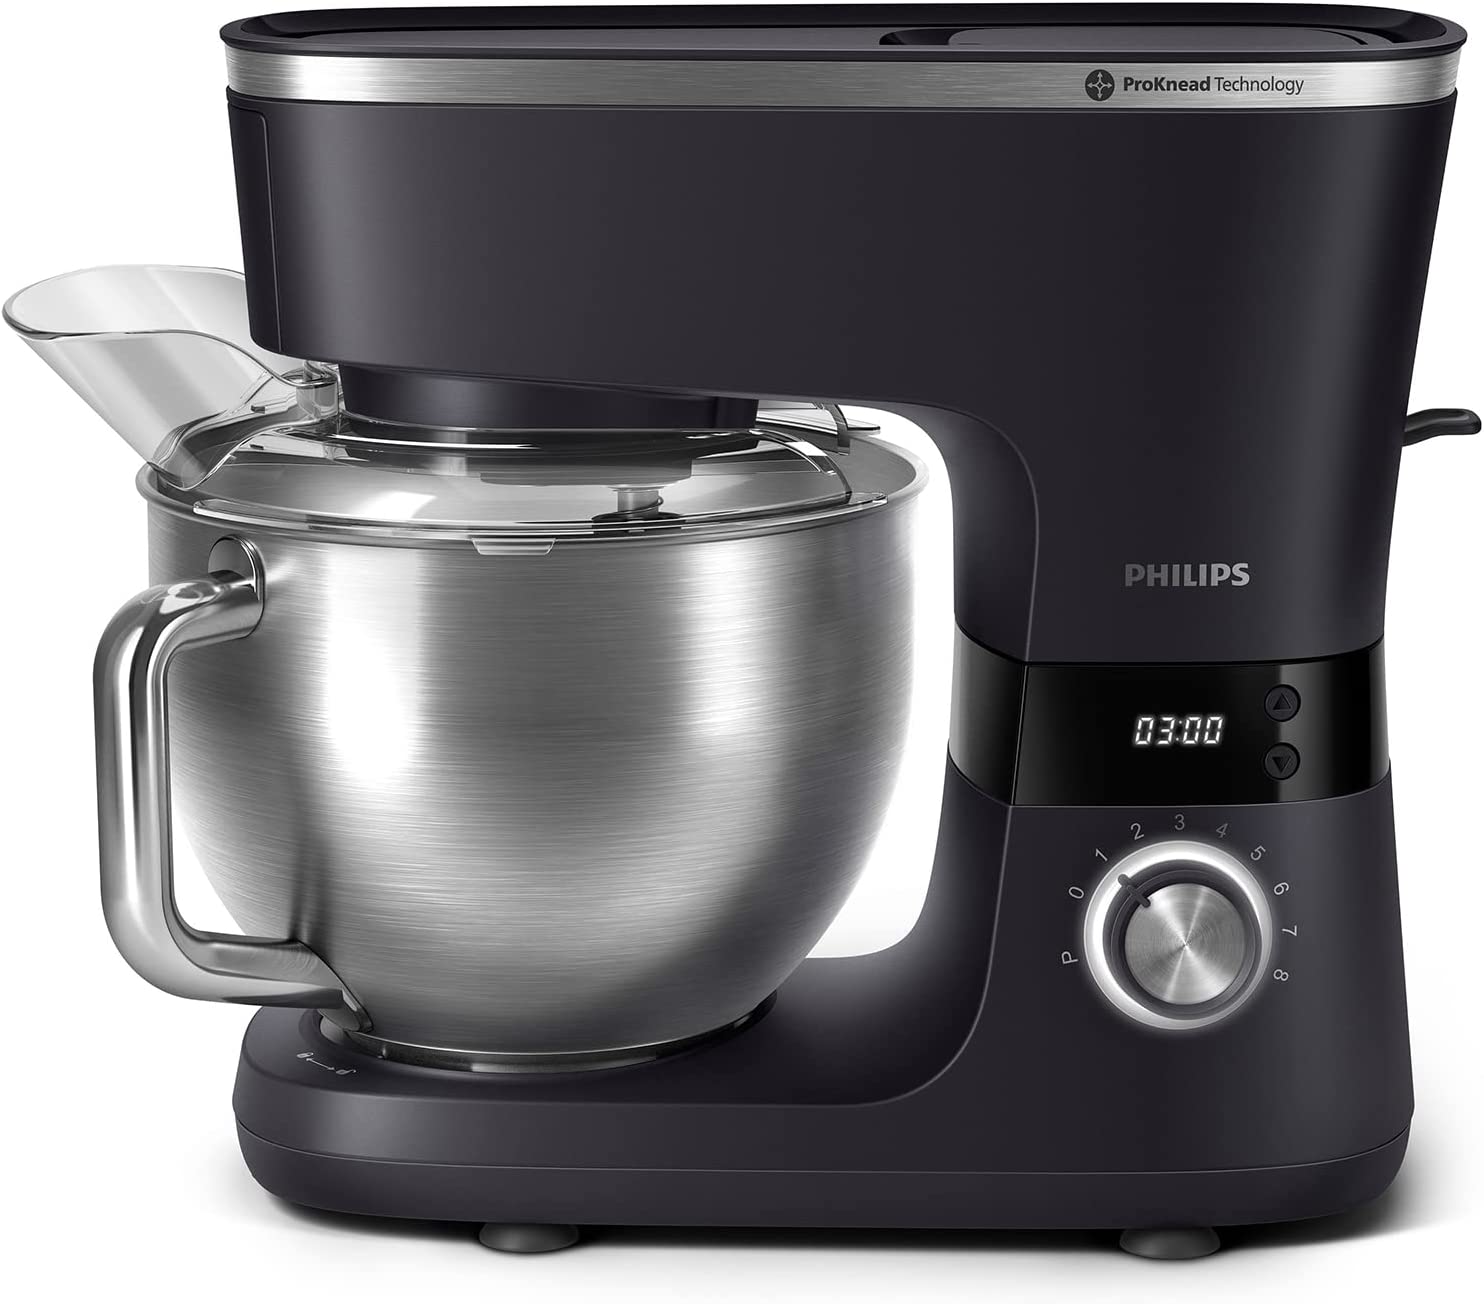 Philips Domestic Appliances Philips 7000 Series Food Processor - 5.5 Litres, 1000 Watt, 8 Speed Levels, ProKnead Technology, Recipes, LED Smart Timer, Dough Hook, Whisk and Whisk (HR7962/01)